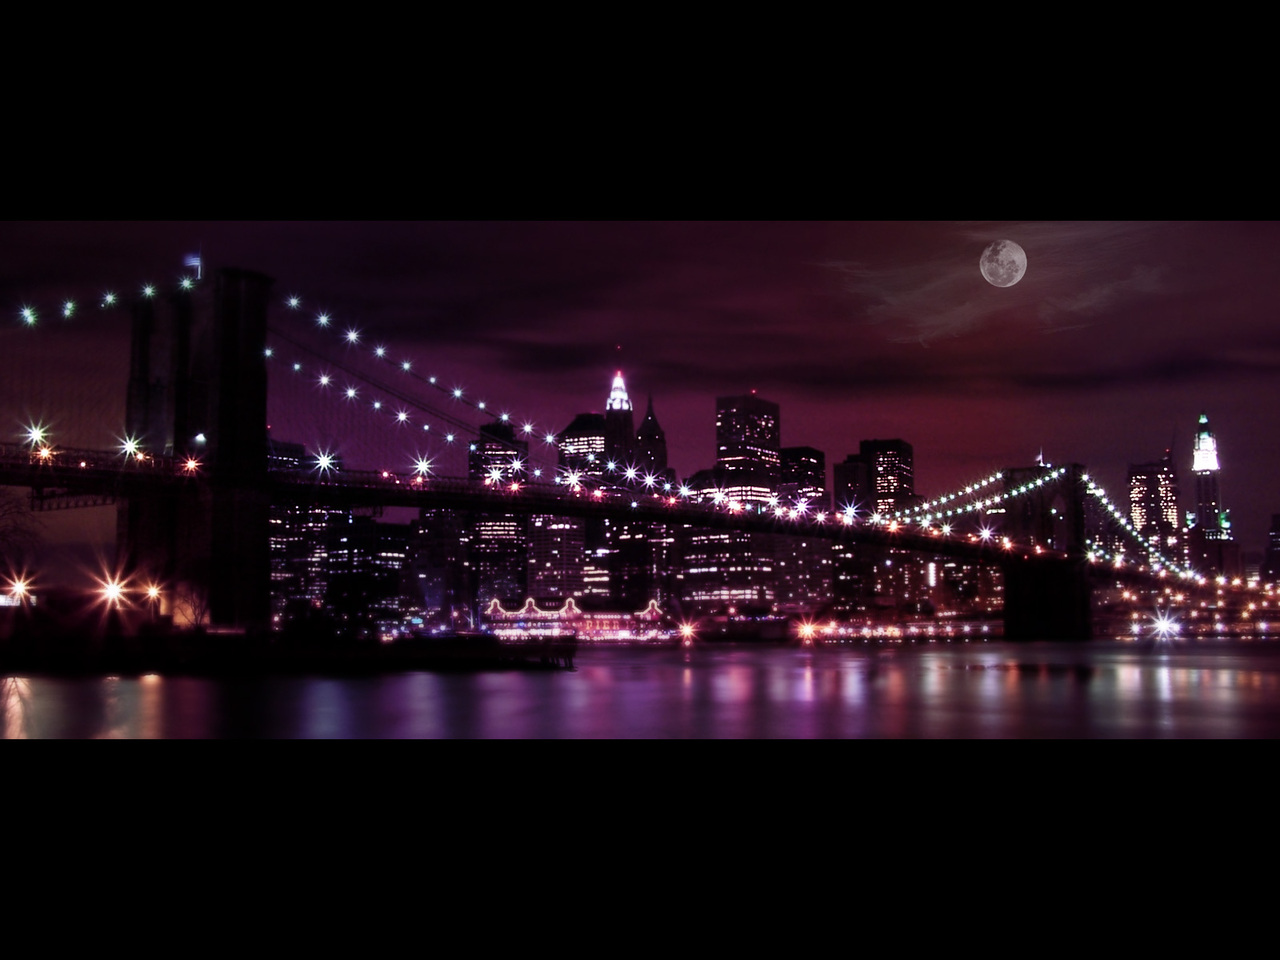 City Lights 16555 Hd Wallpapers in Movies   Imagescicom